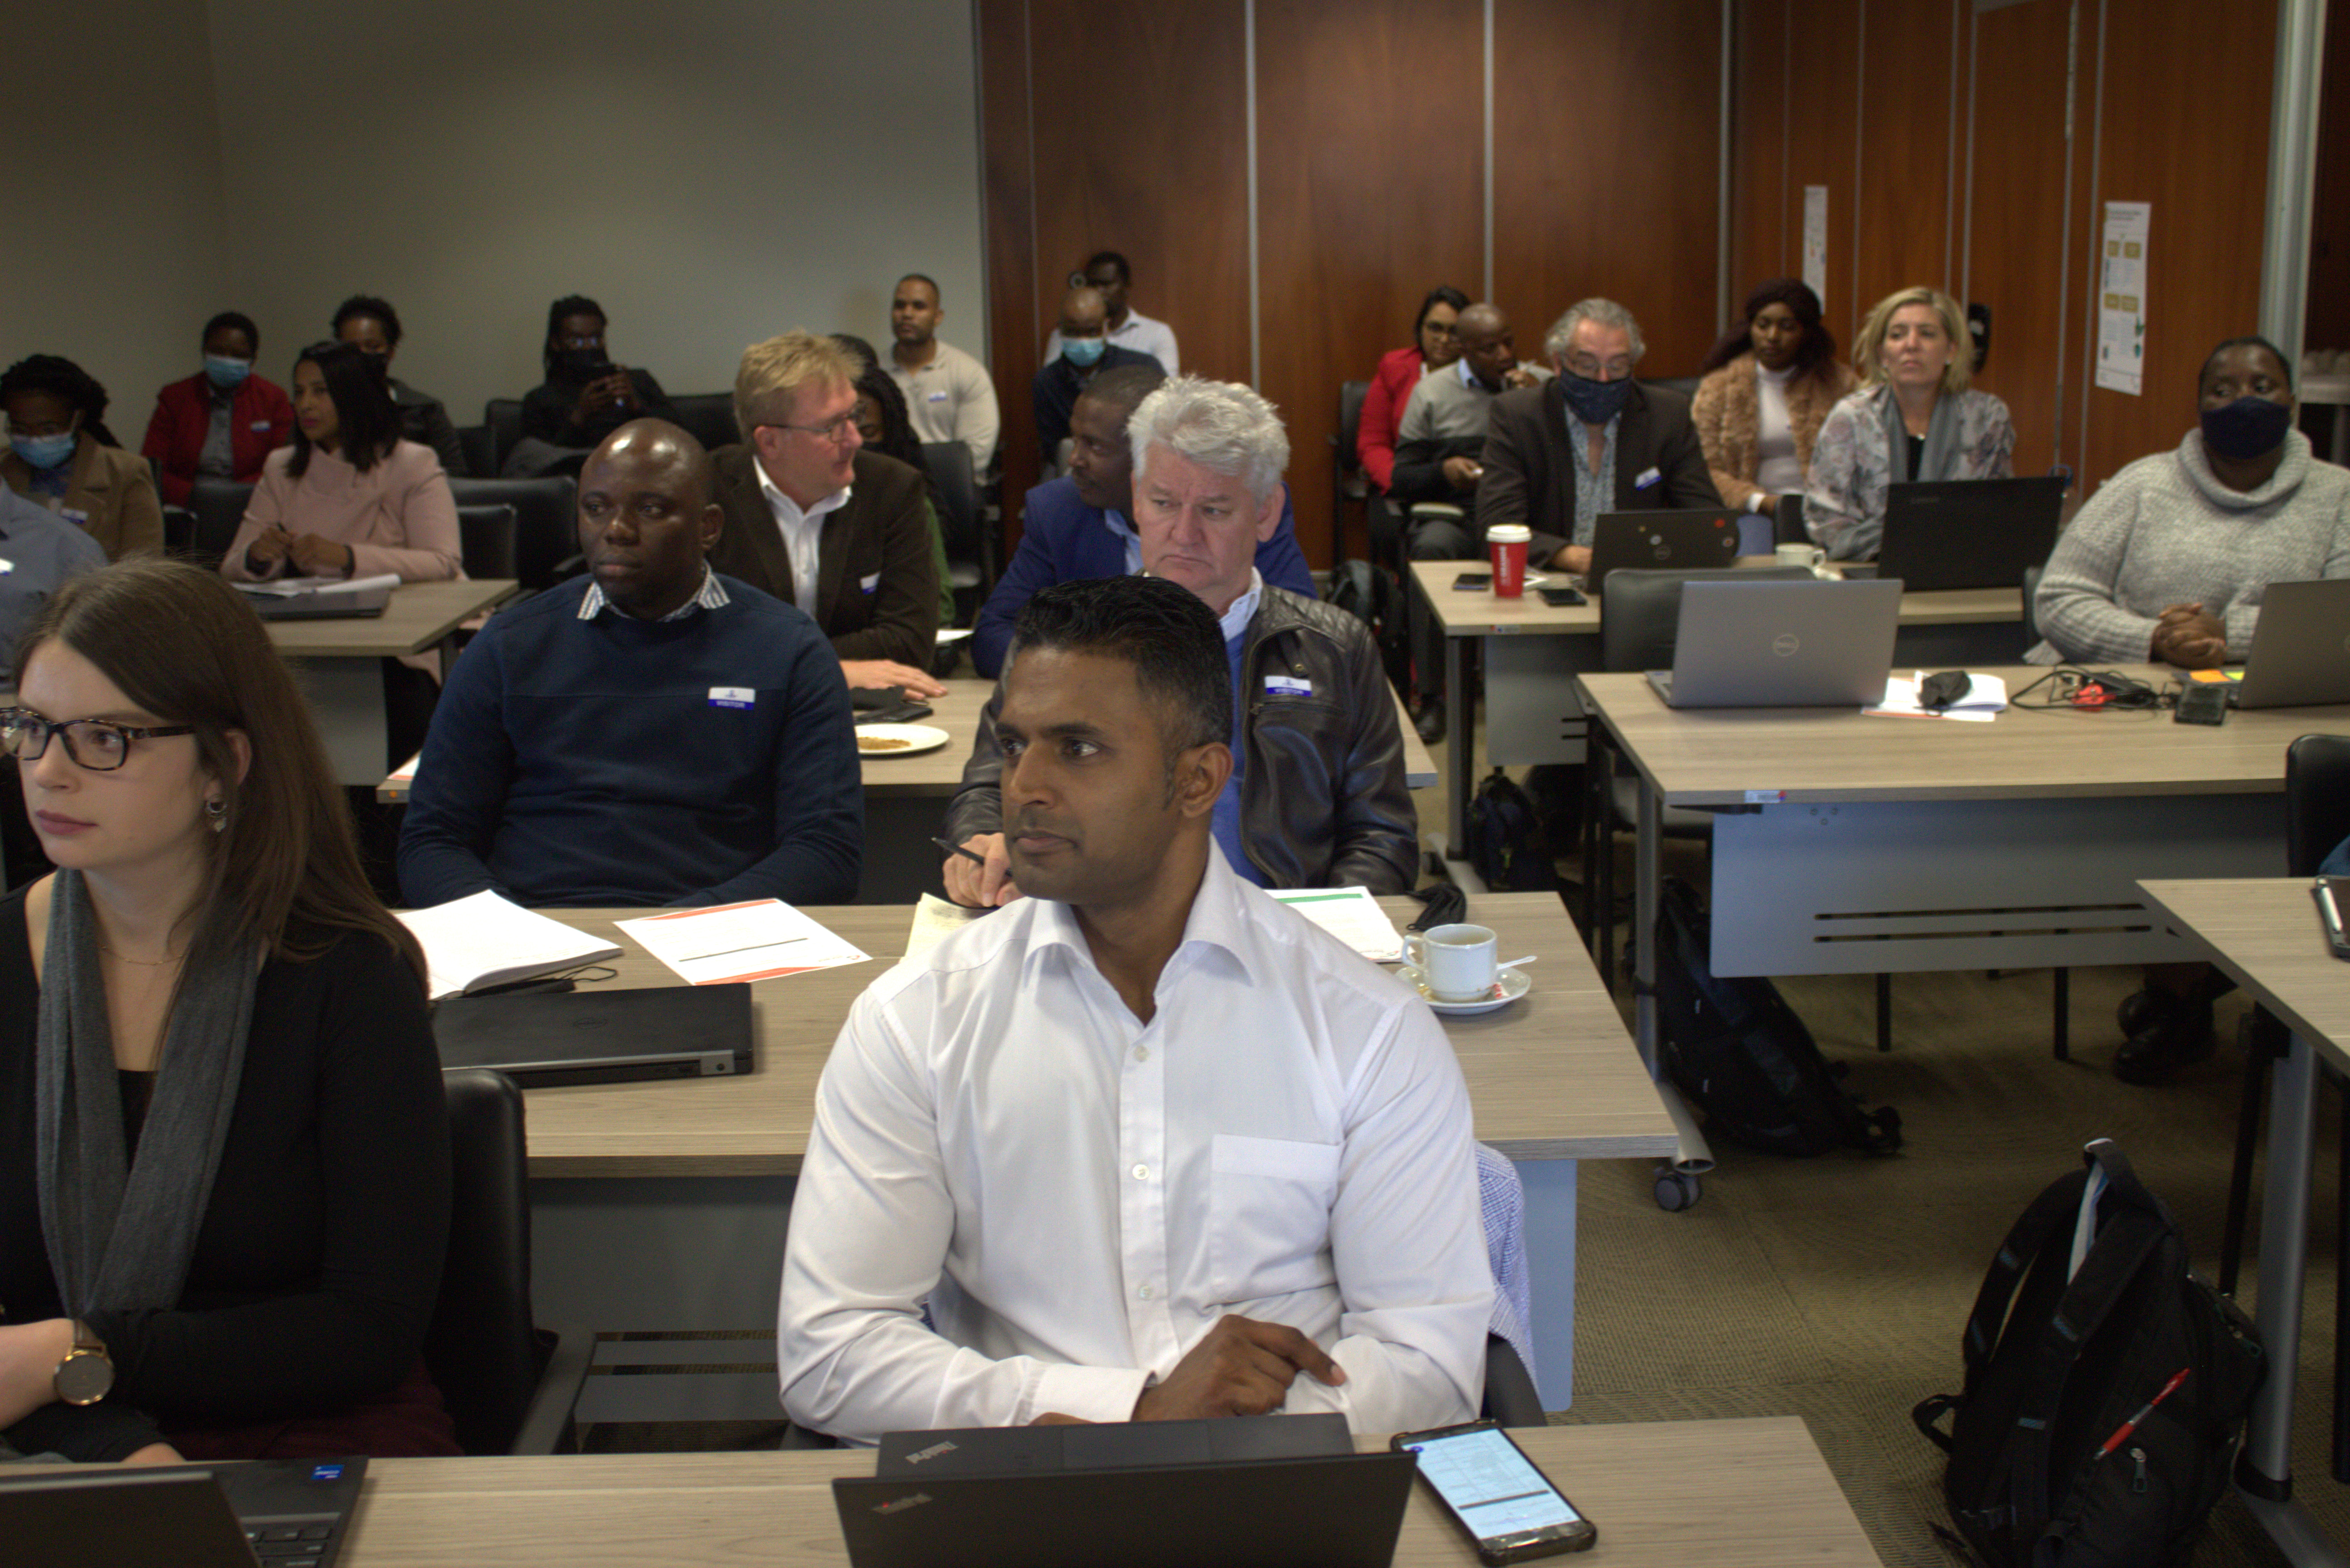 On the 25th of May 2022, the South African National Energy Development Institute (SANEDI) together with the Department of Mineral Resources and Energy (DMRE) hosted a workshop for Energy Performance Certificate (EPC) SANAS Accredited Inspection Bodies (IB) at CEF House.